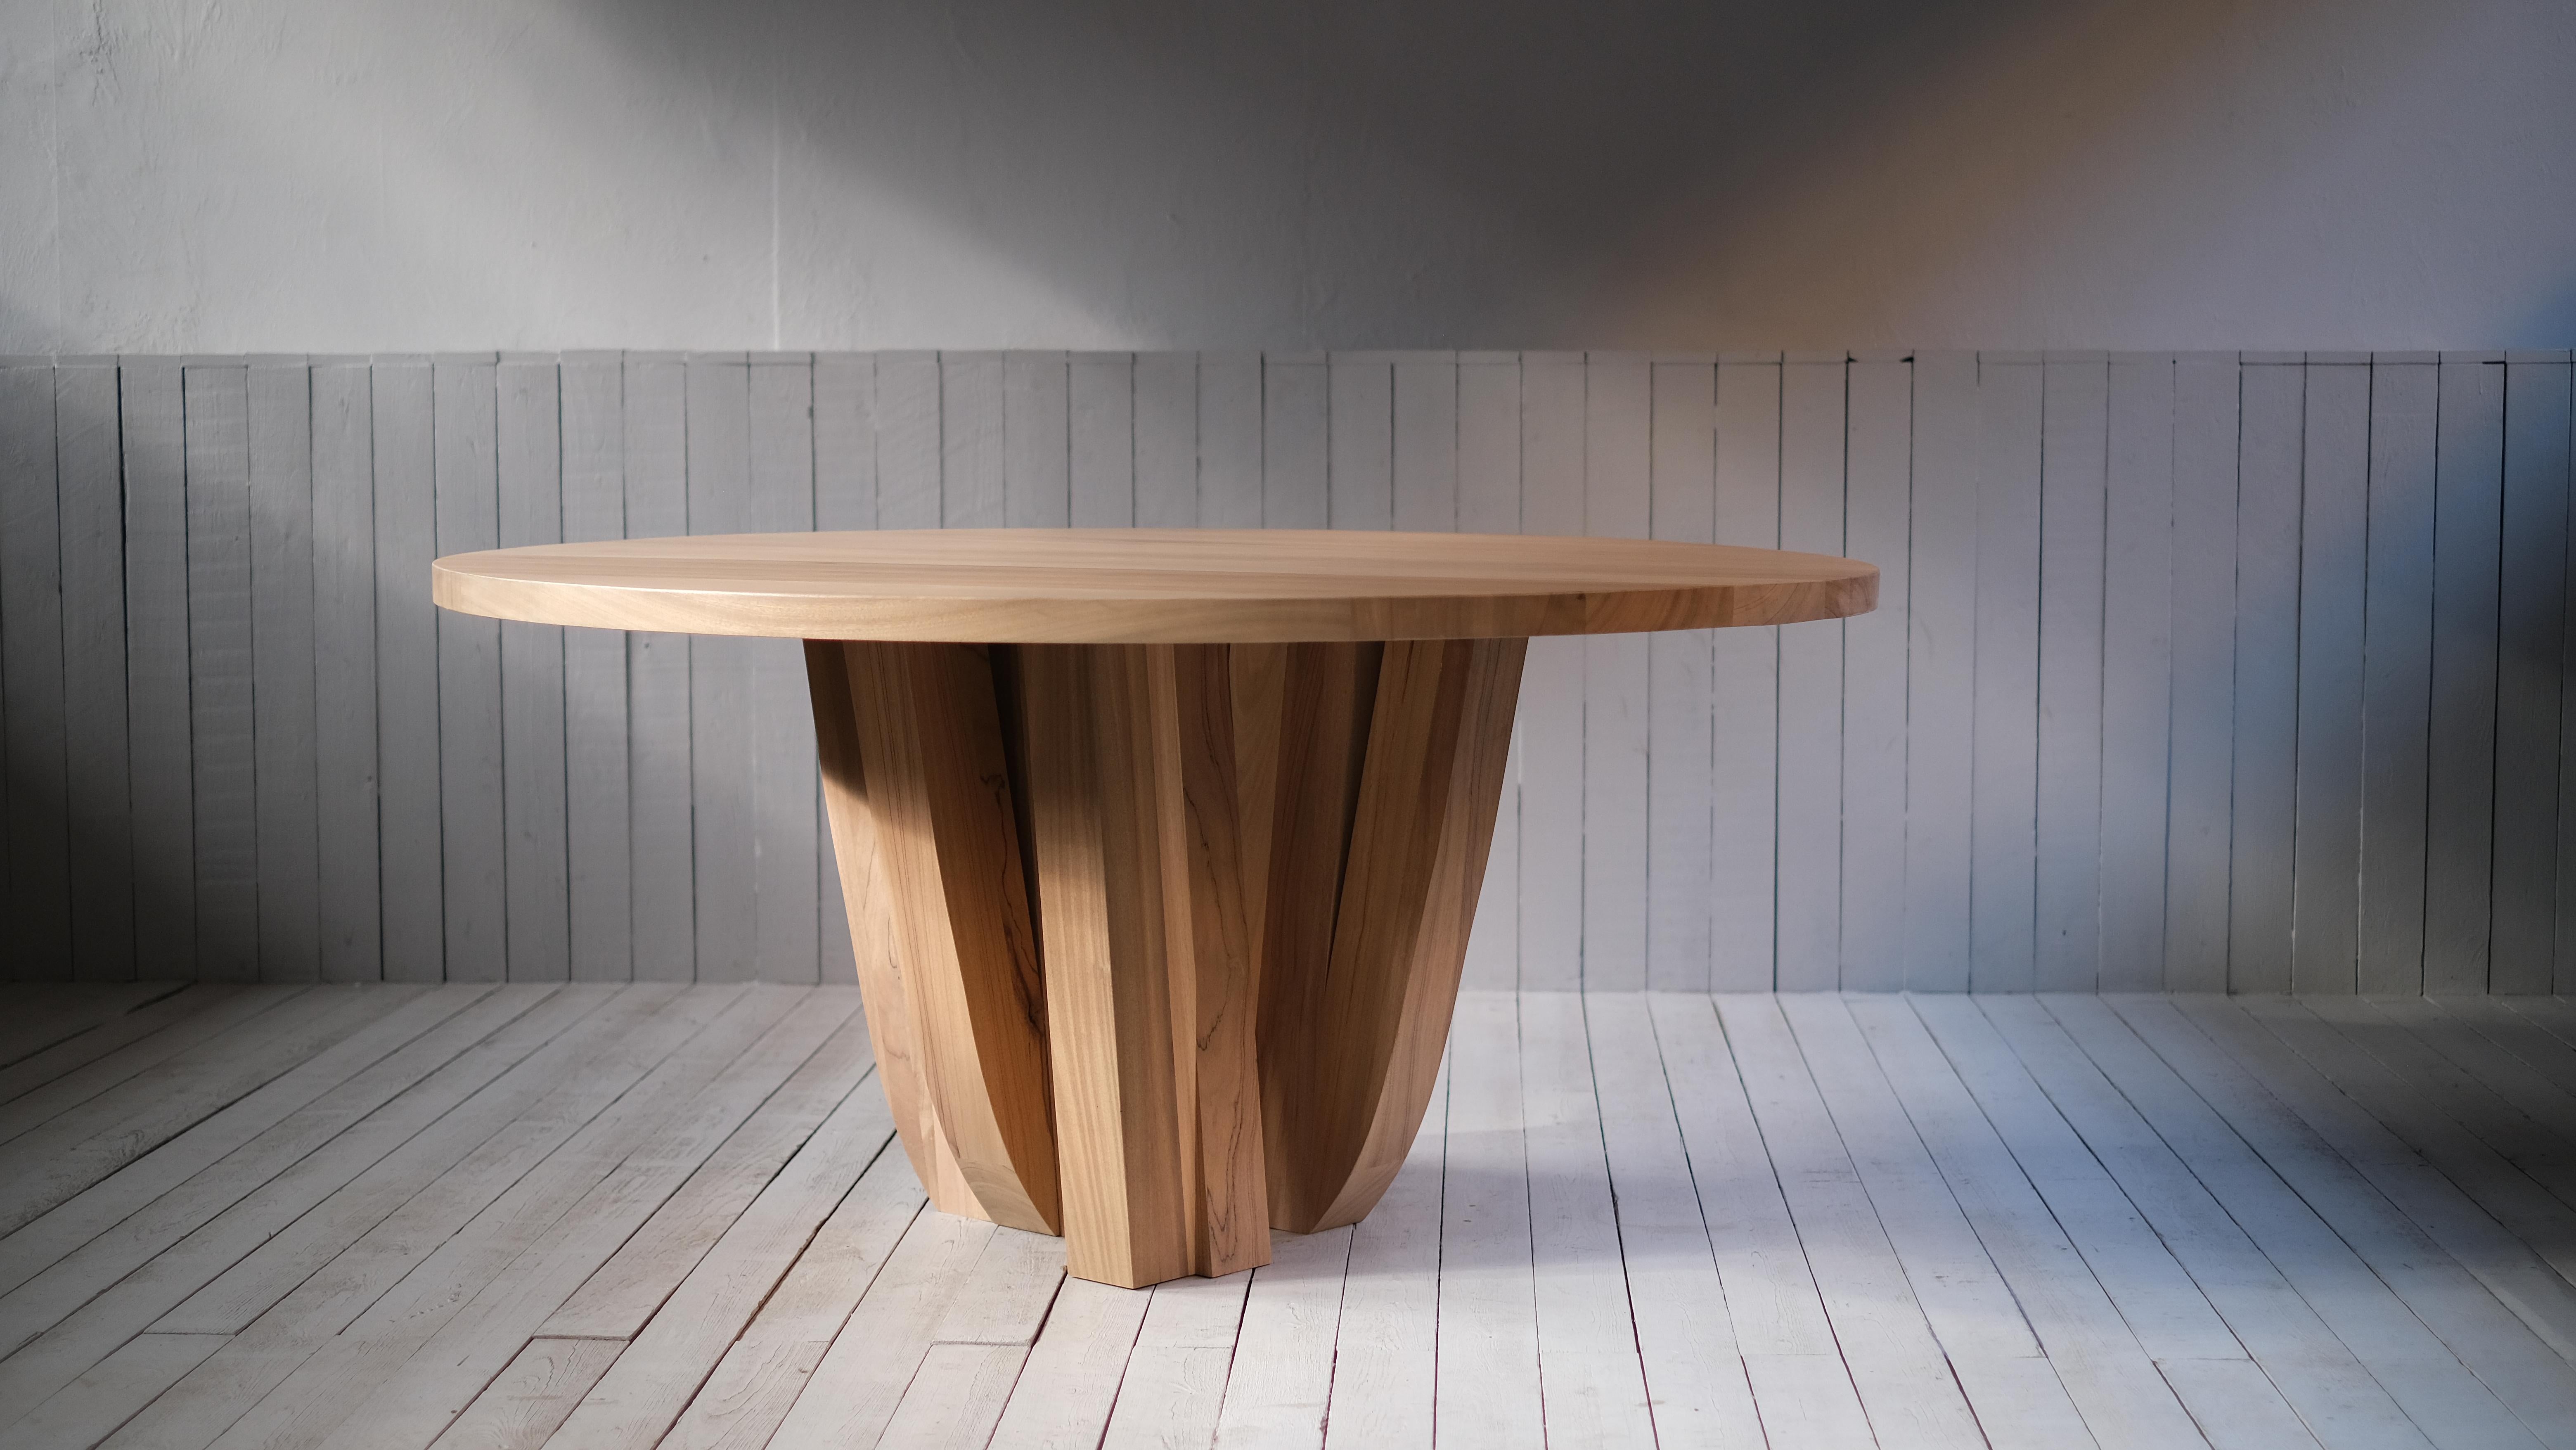 Zoumey table round large by Arno Declercq.
Dimensions: D 180 x H 70 cm.
Materials: African walnut.
Signed by Arno Declercq

**They come without a table top.

A forest of table legs made out of 16 pieces of African walnut.

Arno